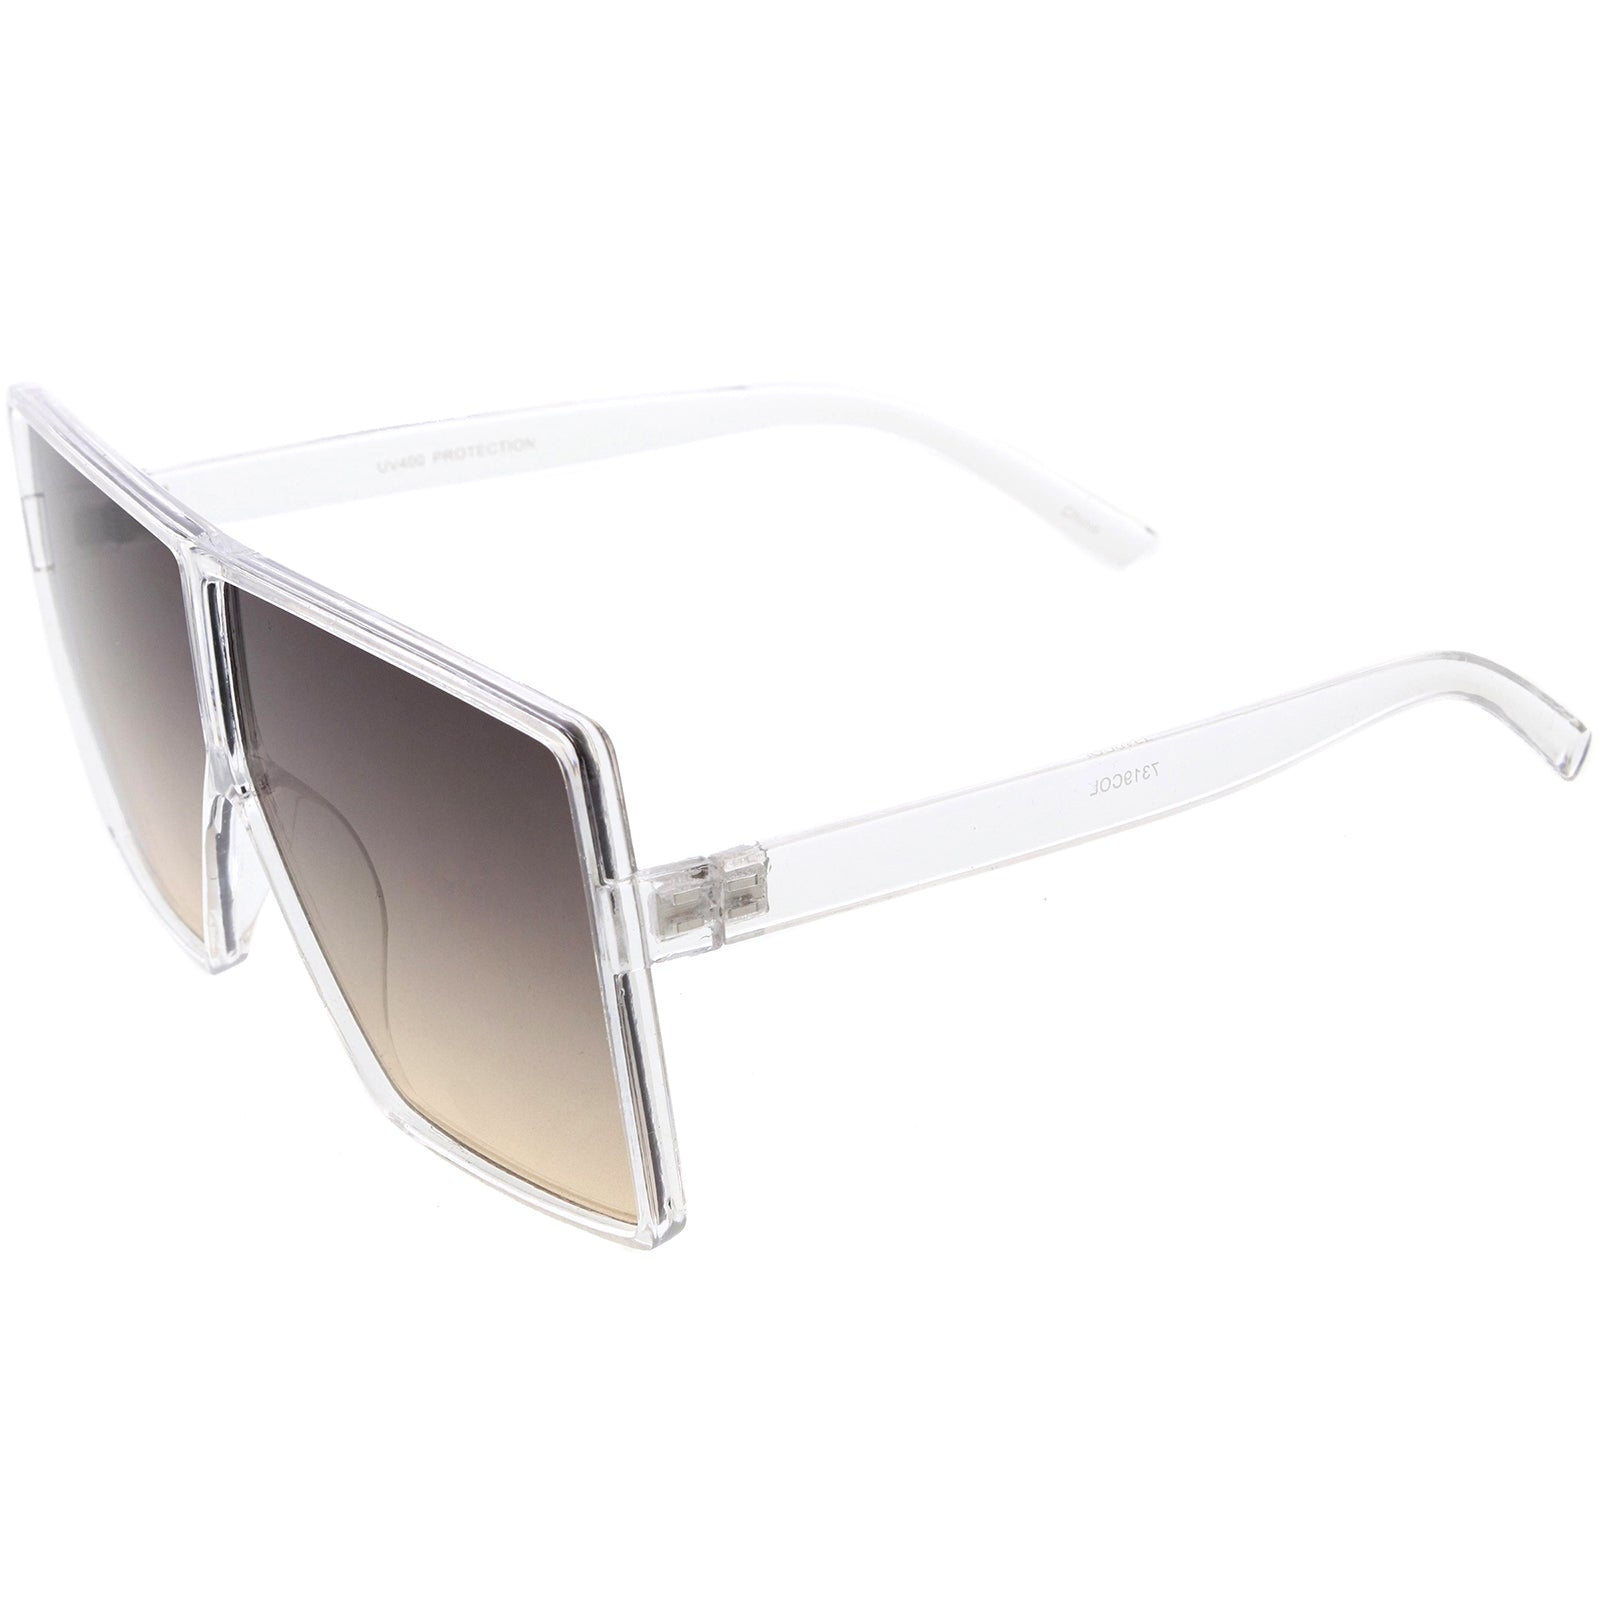 Oversized Square Large Sunglasses For Women Top Brand Eyewear For Travel  And Shades From Granthill, $18.58